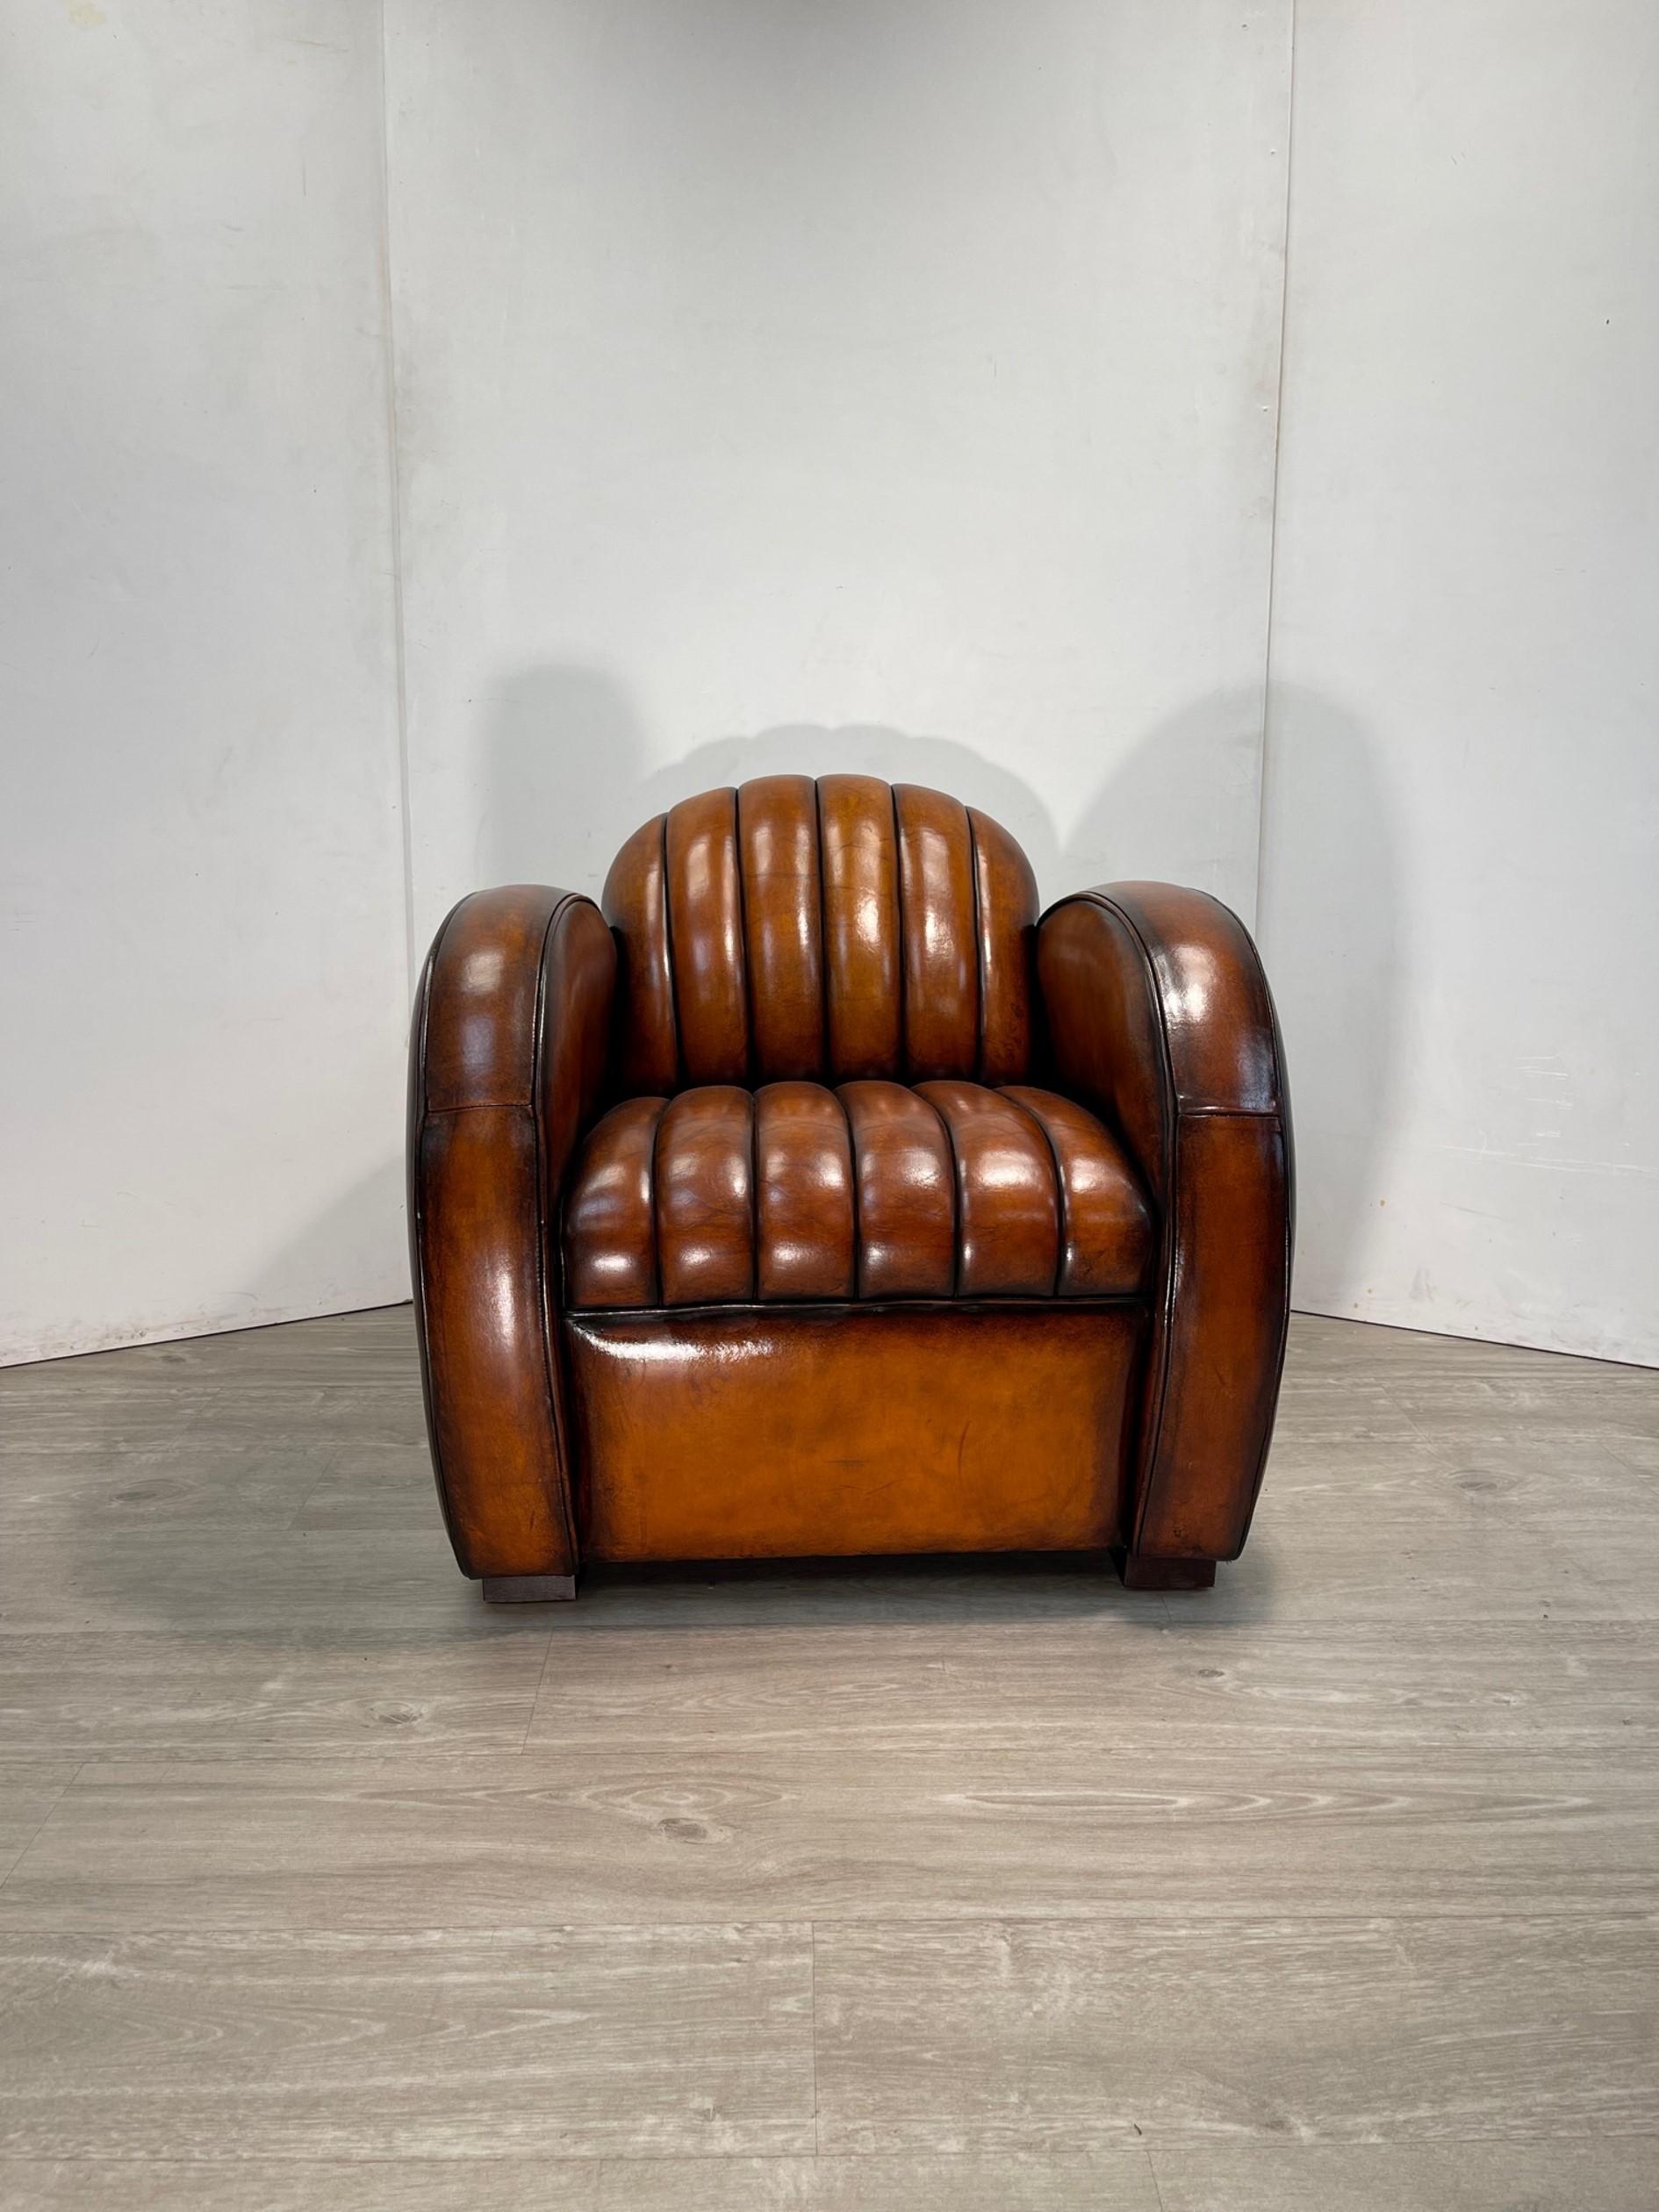 We are delighted to offer for sale this absolutely stunning fully restored hand dyed cigar brown leather, Art Deco style armchair based on the 1966 Mustang Fastback

What a chair! This is the only one in the world with this exact colour finish, it